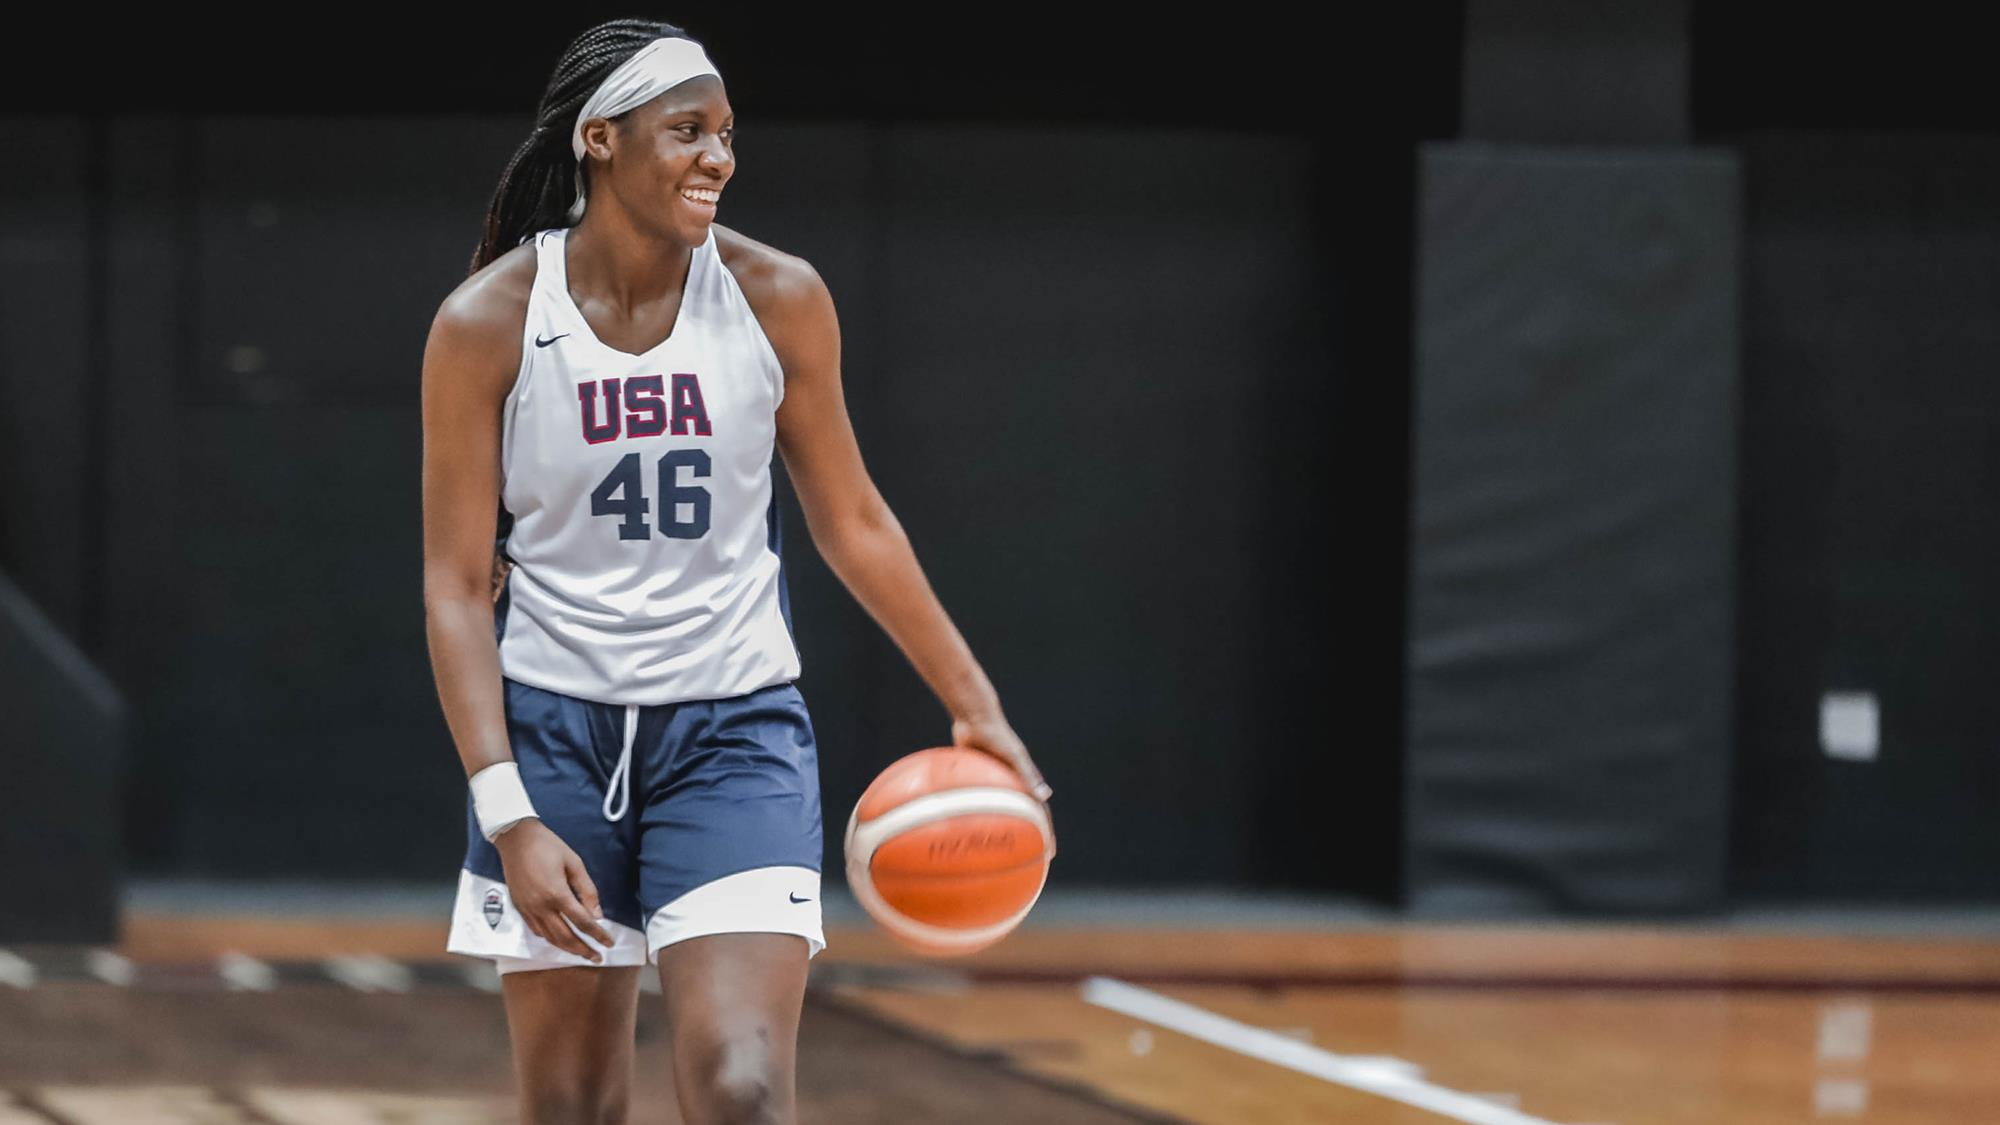 Rhyne Howard One of 13 Finalists for USA Basketball AmeriCup Team